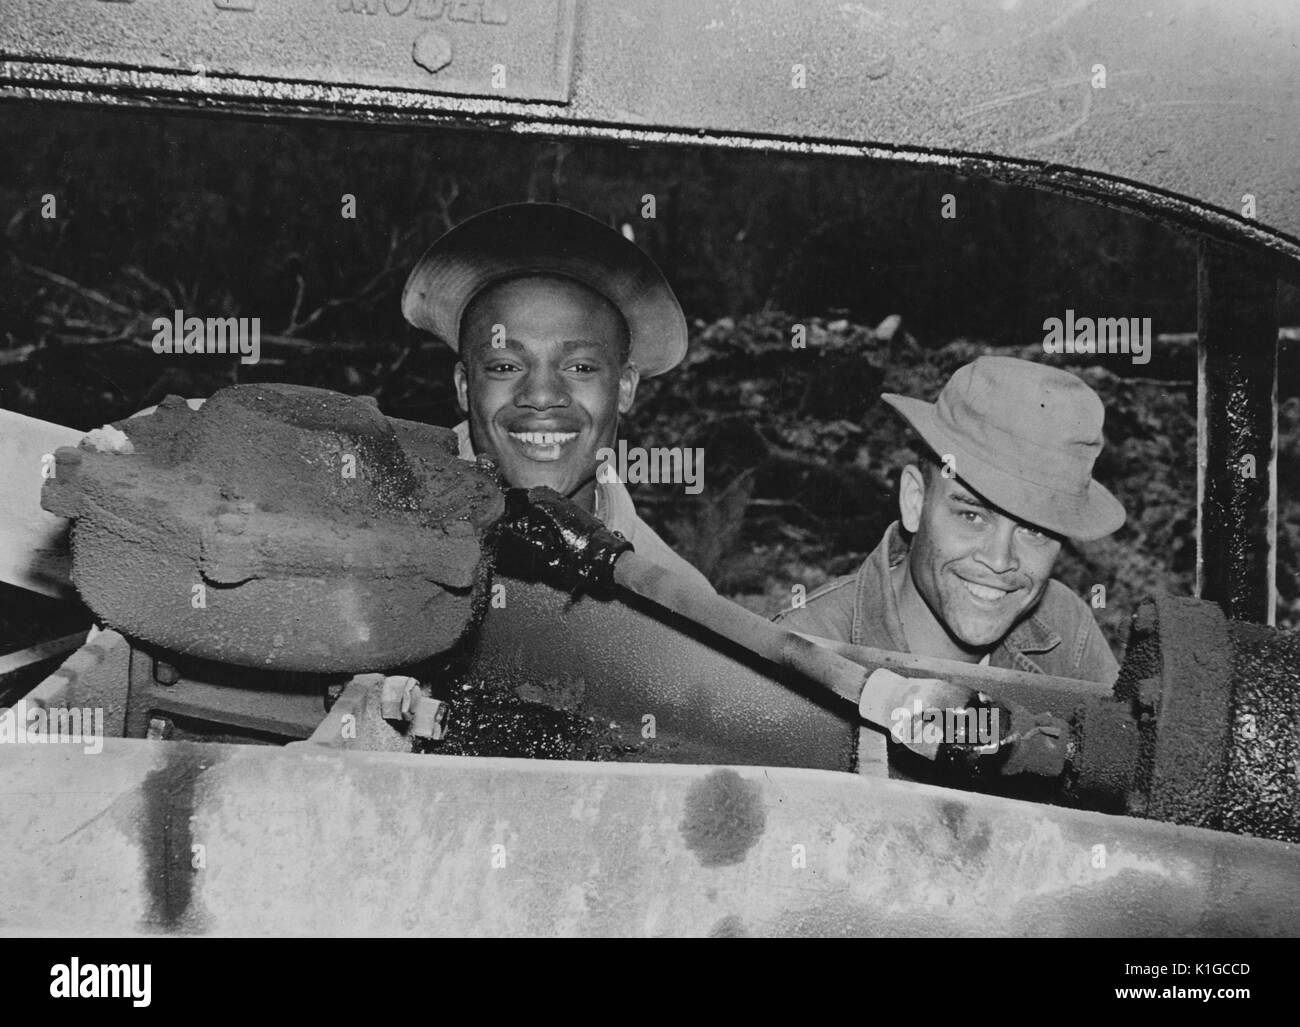 Two soldiers, Private James A Jackson of Kearneysville, West Virginia, and Private First Class Willie Lee Jell, of Baton Rouge, Louisiana, making repairs on a motor grader, 1942. From the New York Public Library. Stock Photo